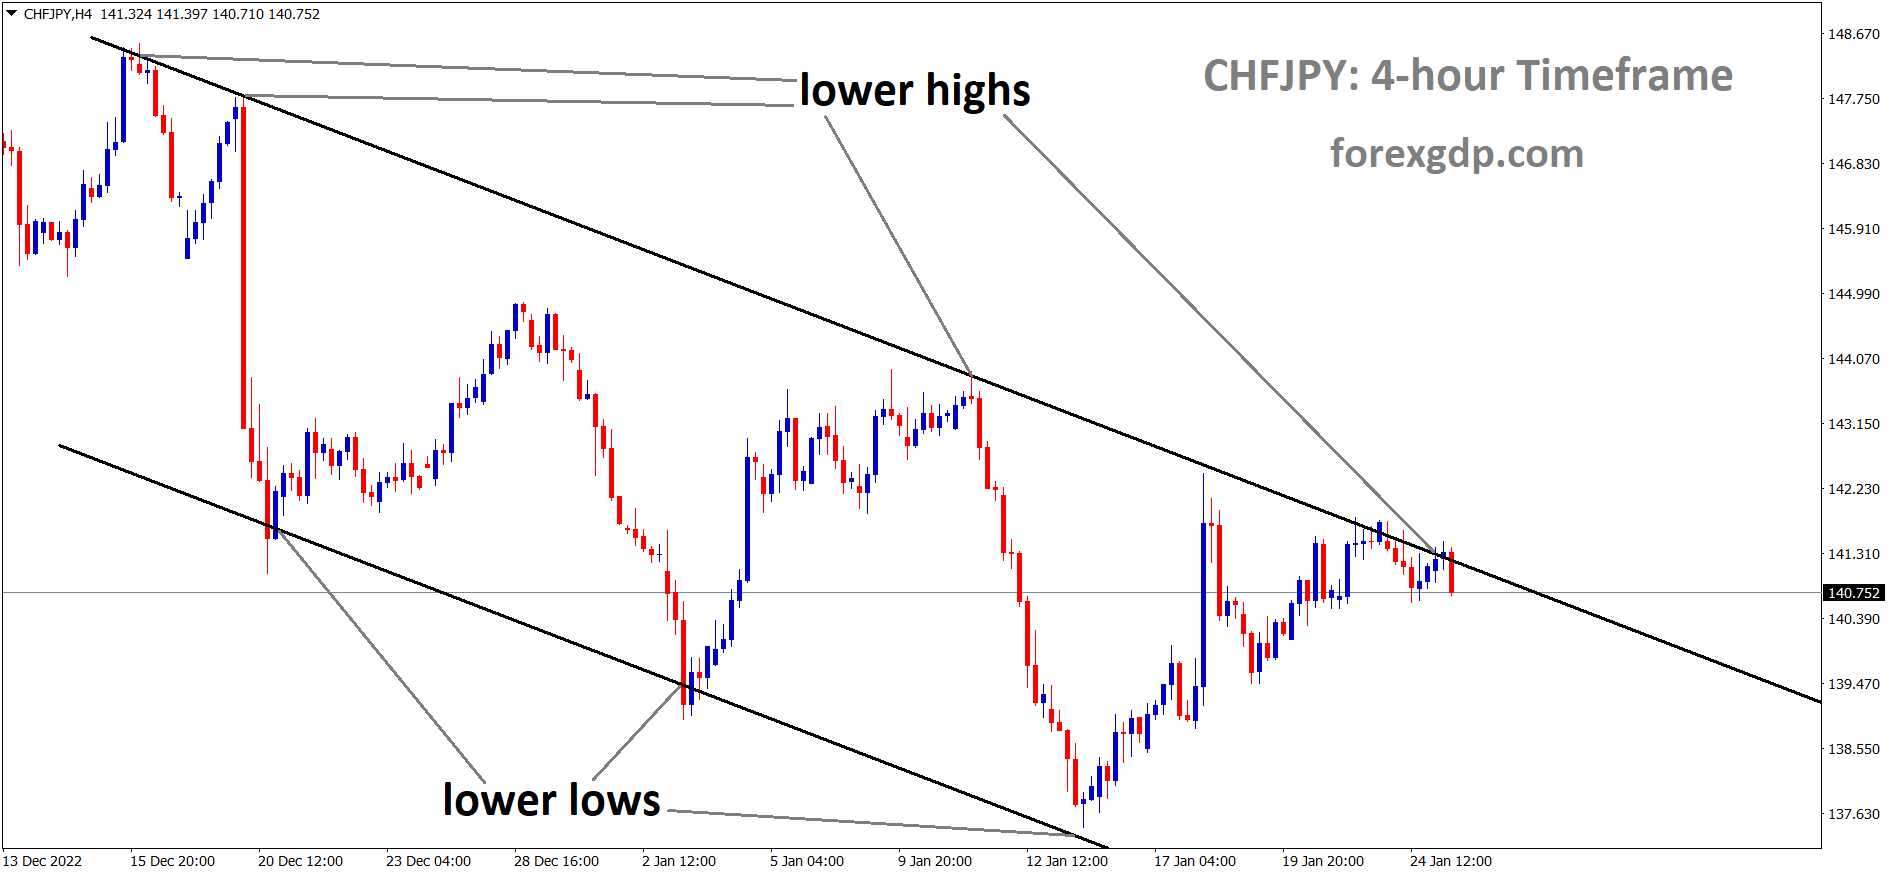 CHFJPY is moving in the Descending channel and the market has reached the lower high area of the channel. 1